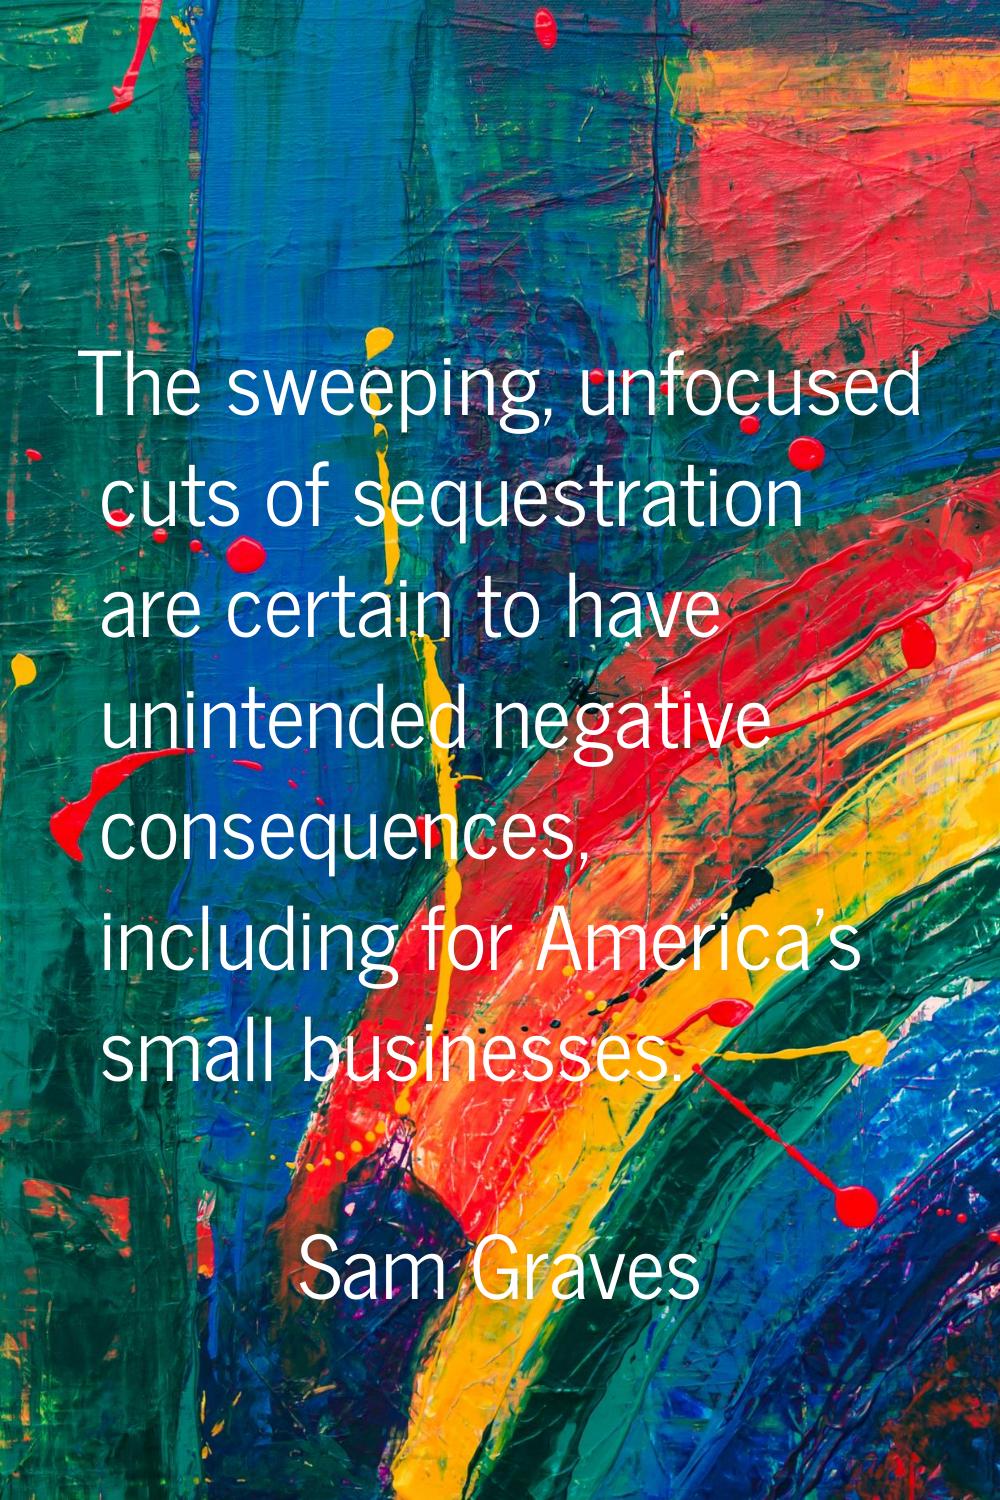 The sweeping, unfocused cuts of sequestration are certain to have unintended negative consequences,